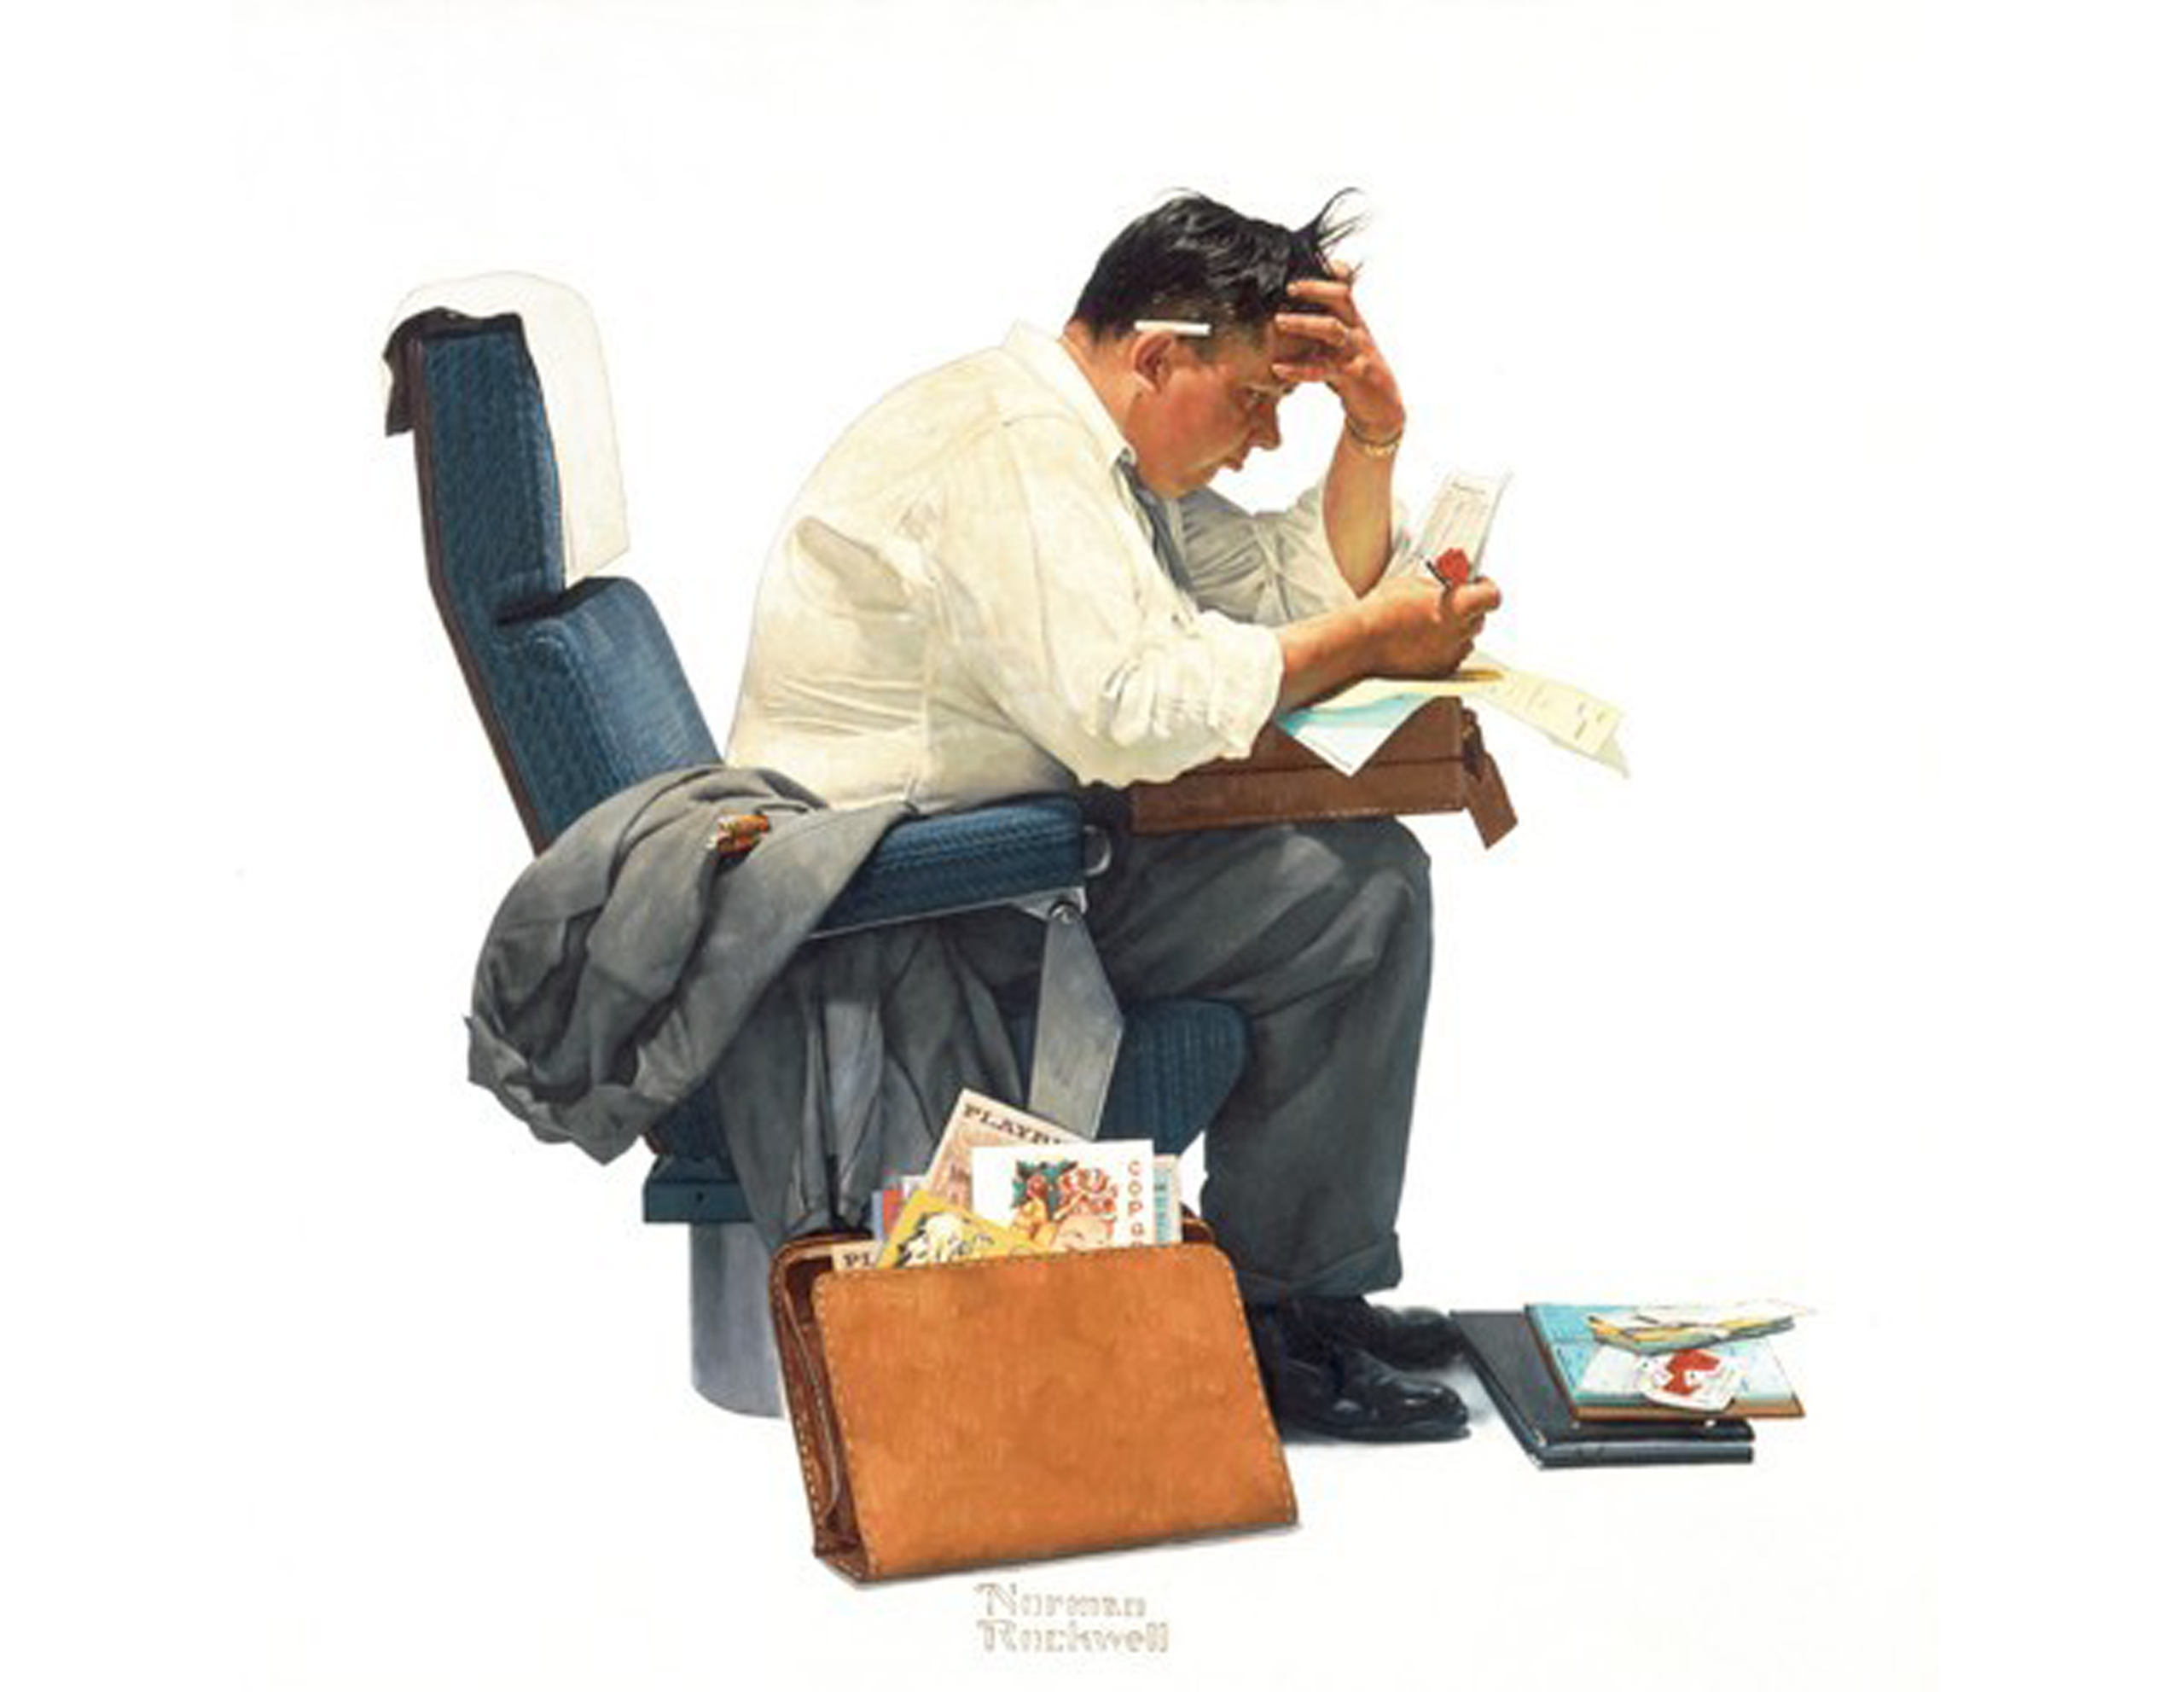 Norman Rockwell (1894-1978), "Expense Account," 1957. Painting for "The Saturday Evening Post" cover, November 30, 1957. Oil on canvas, 31 /14" x 29". Norman Rockwell Museum Collections. ©SEPS: Curtis Publishing, Indianapolis, IN.